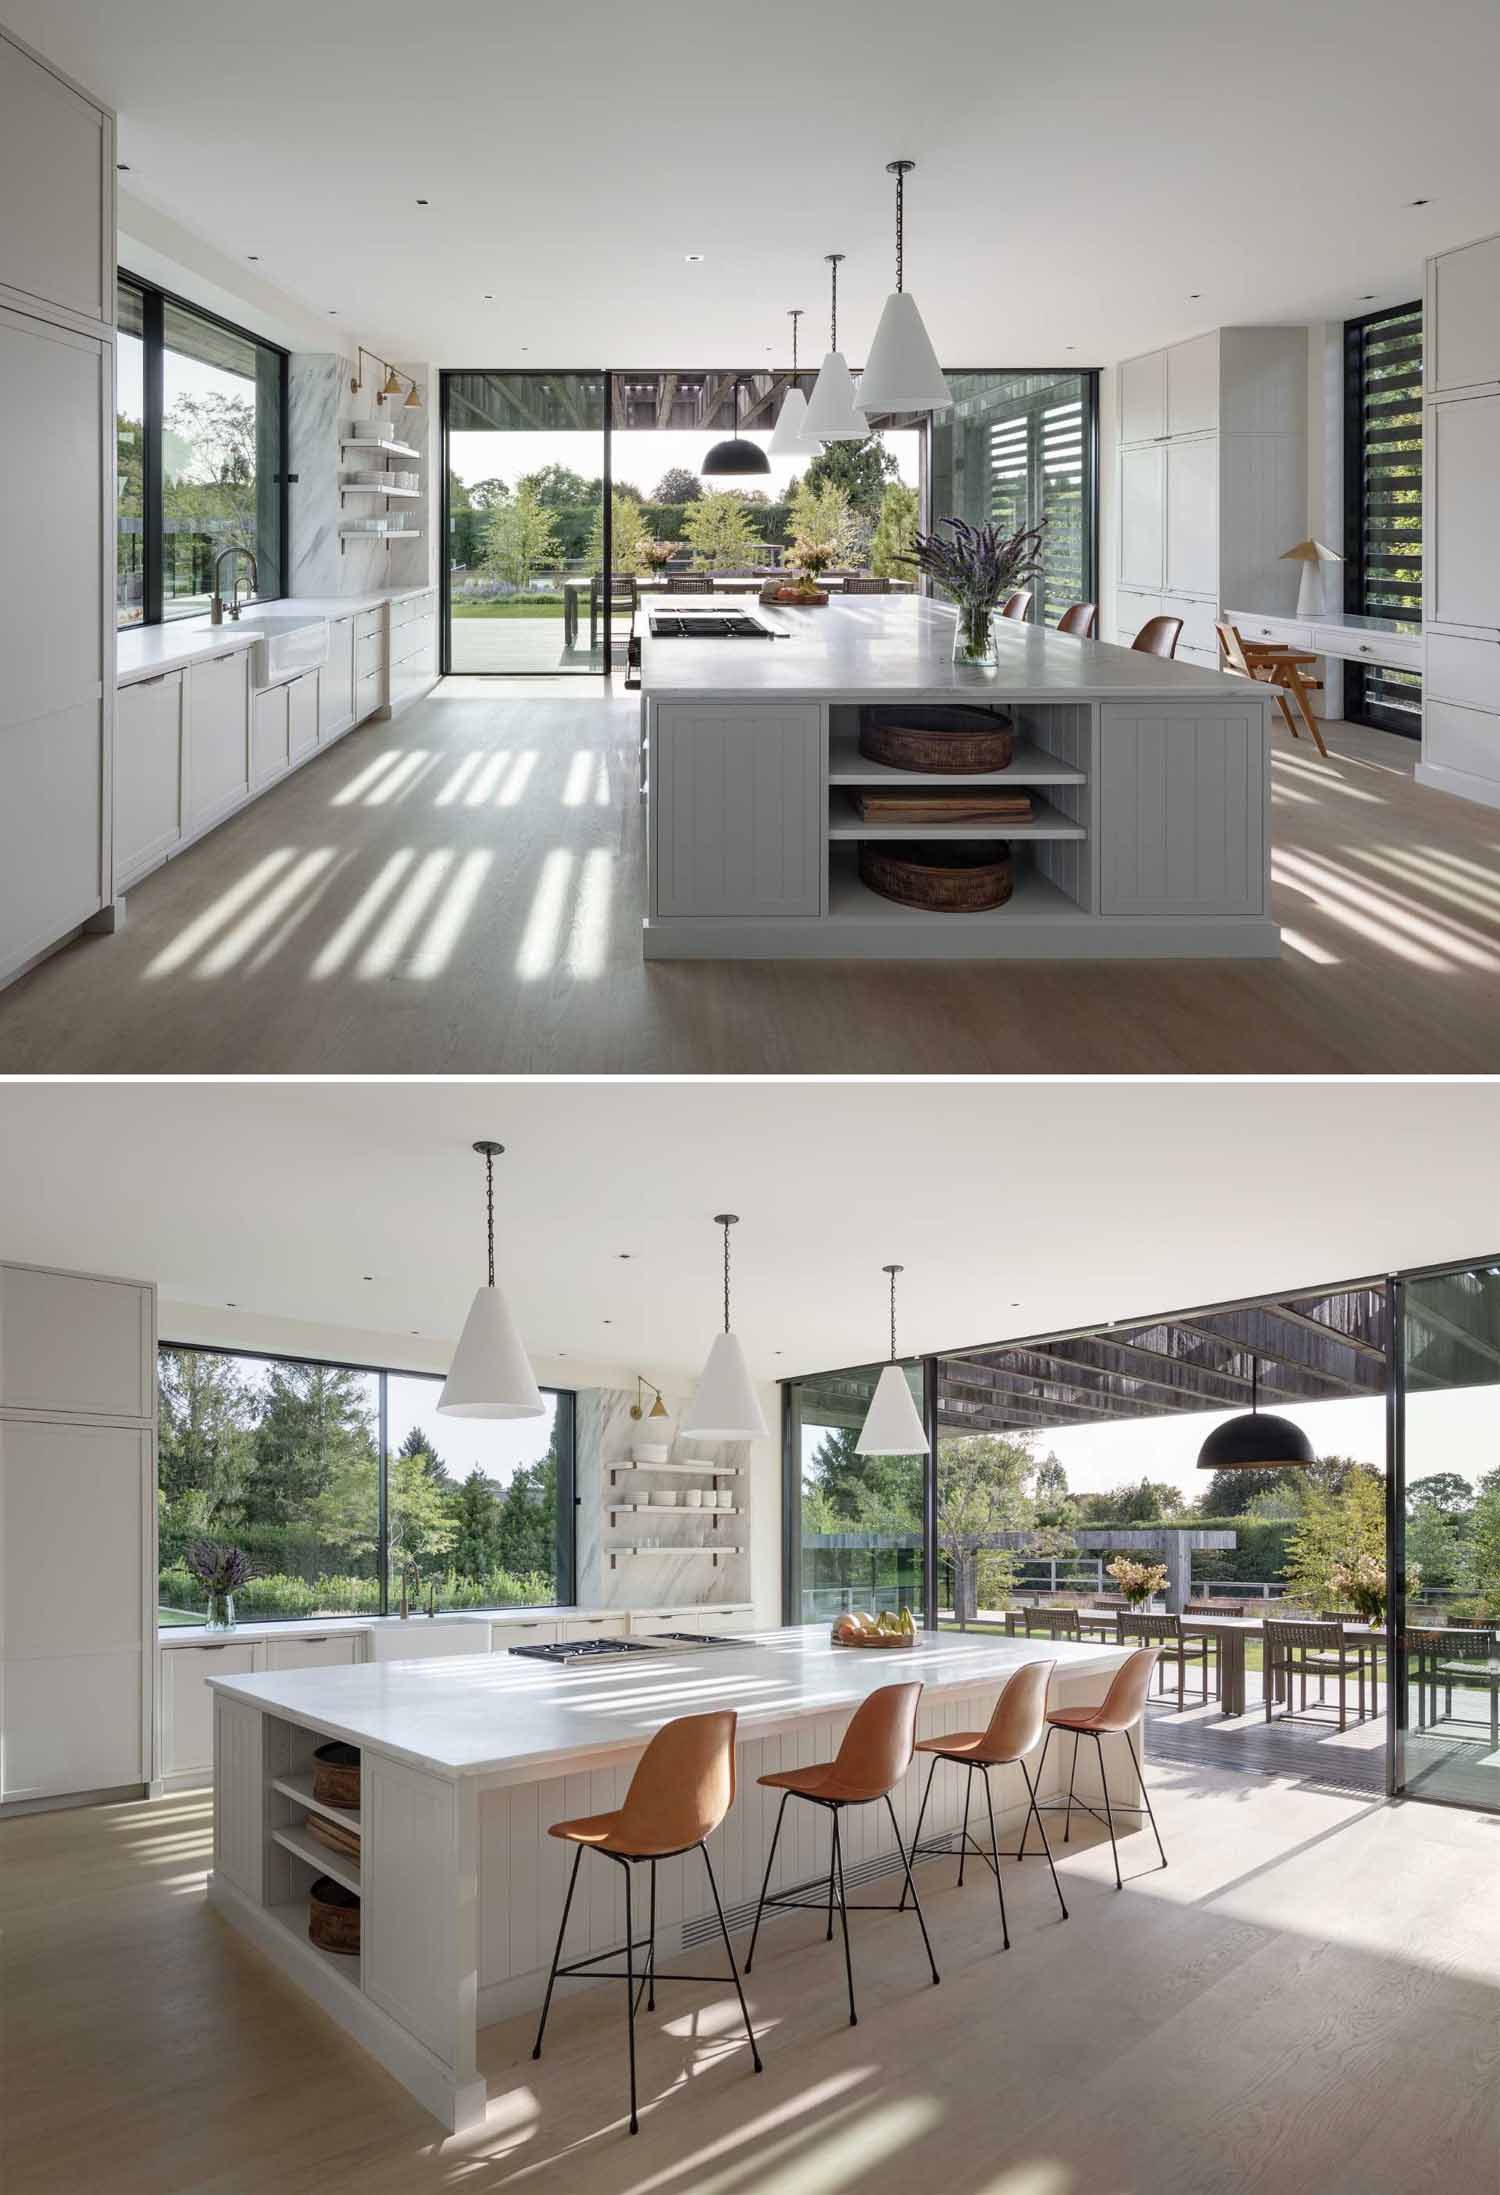 The kitchen has a large island with seating and storage, while the nearby sliding glass doors open to the porch for outdoor dining.